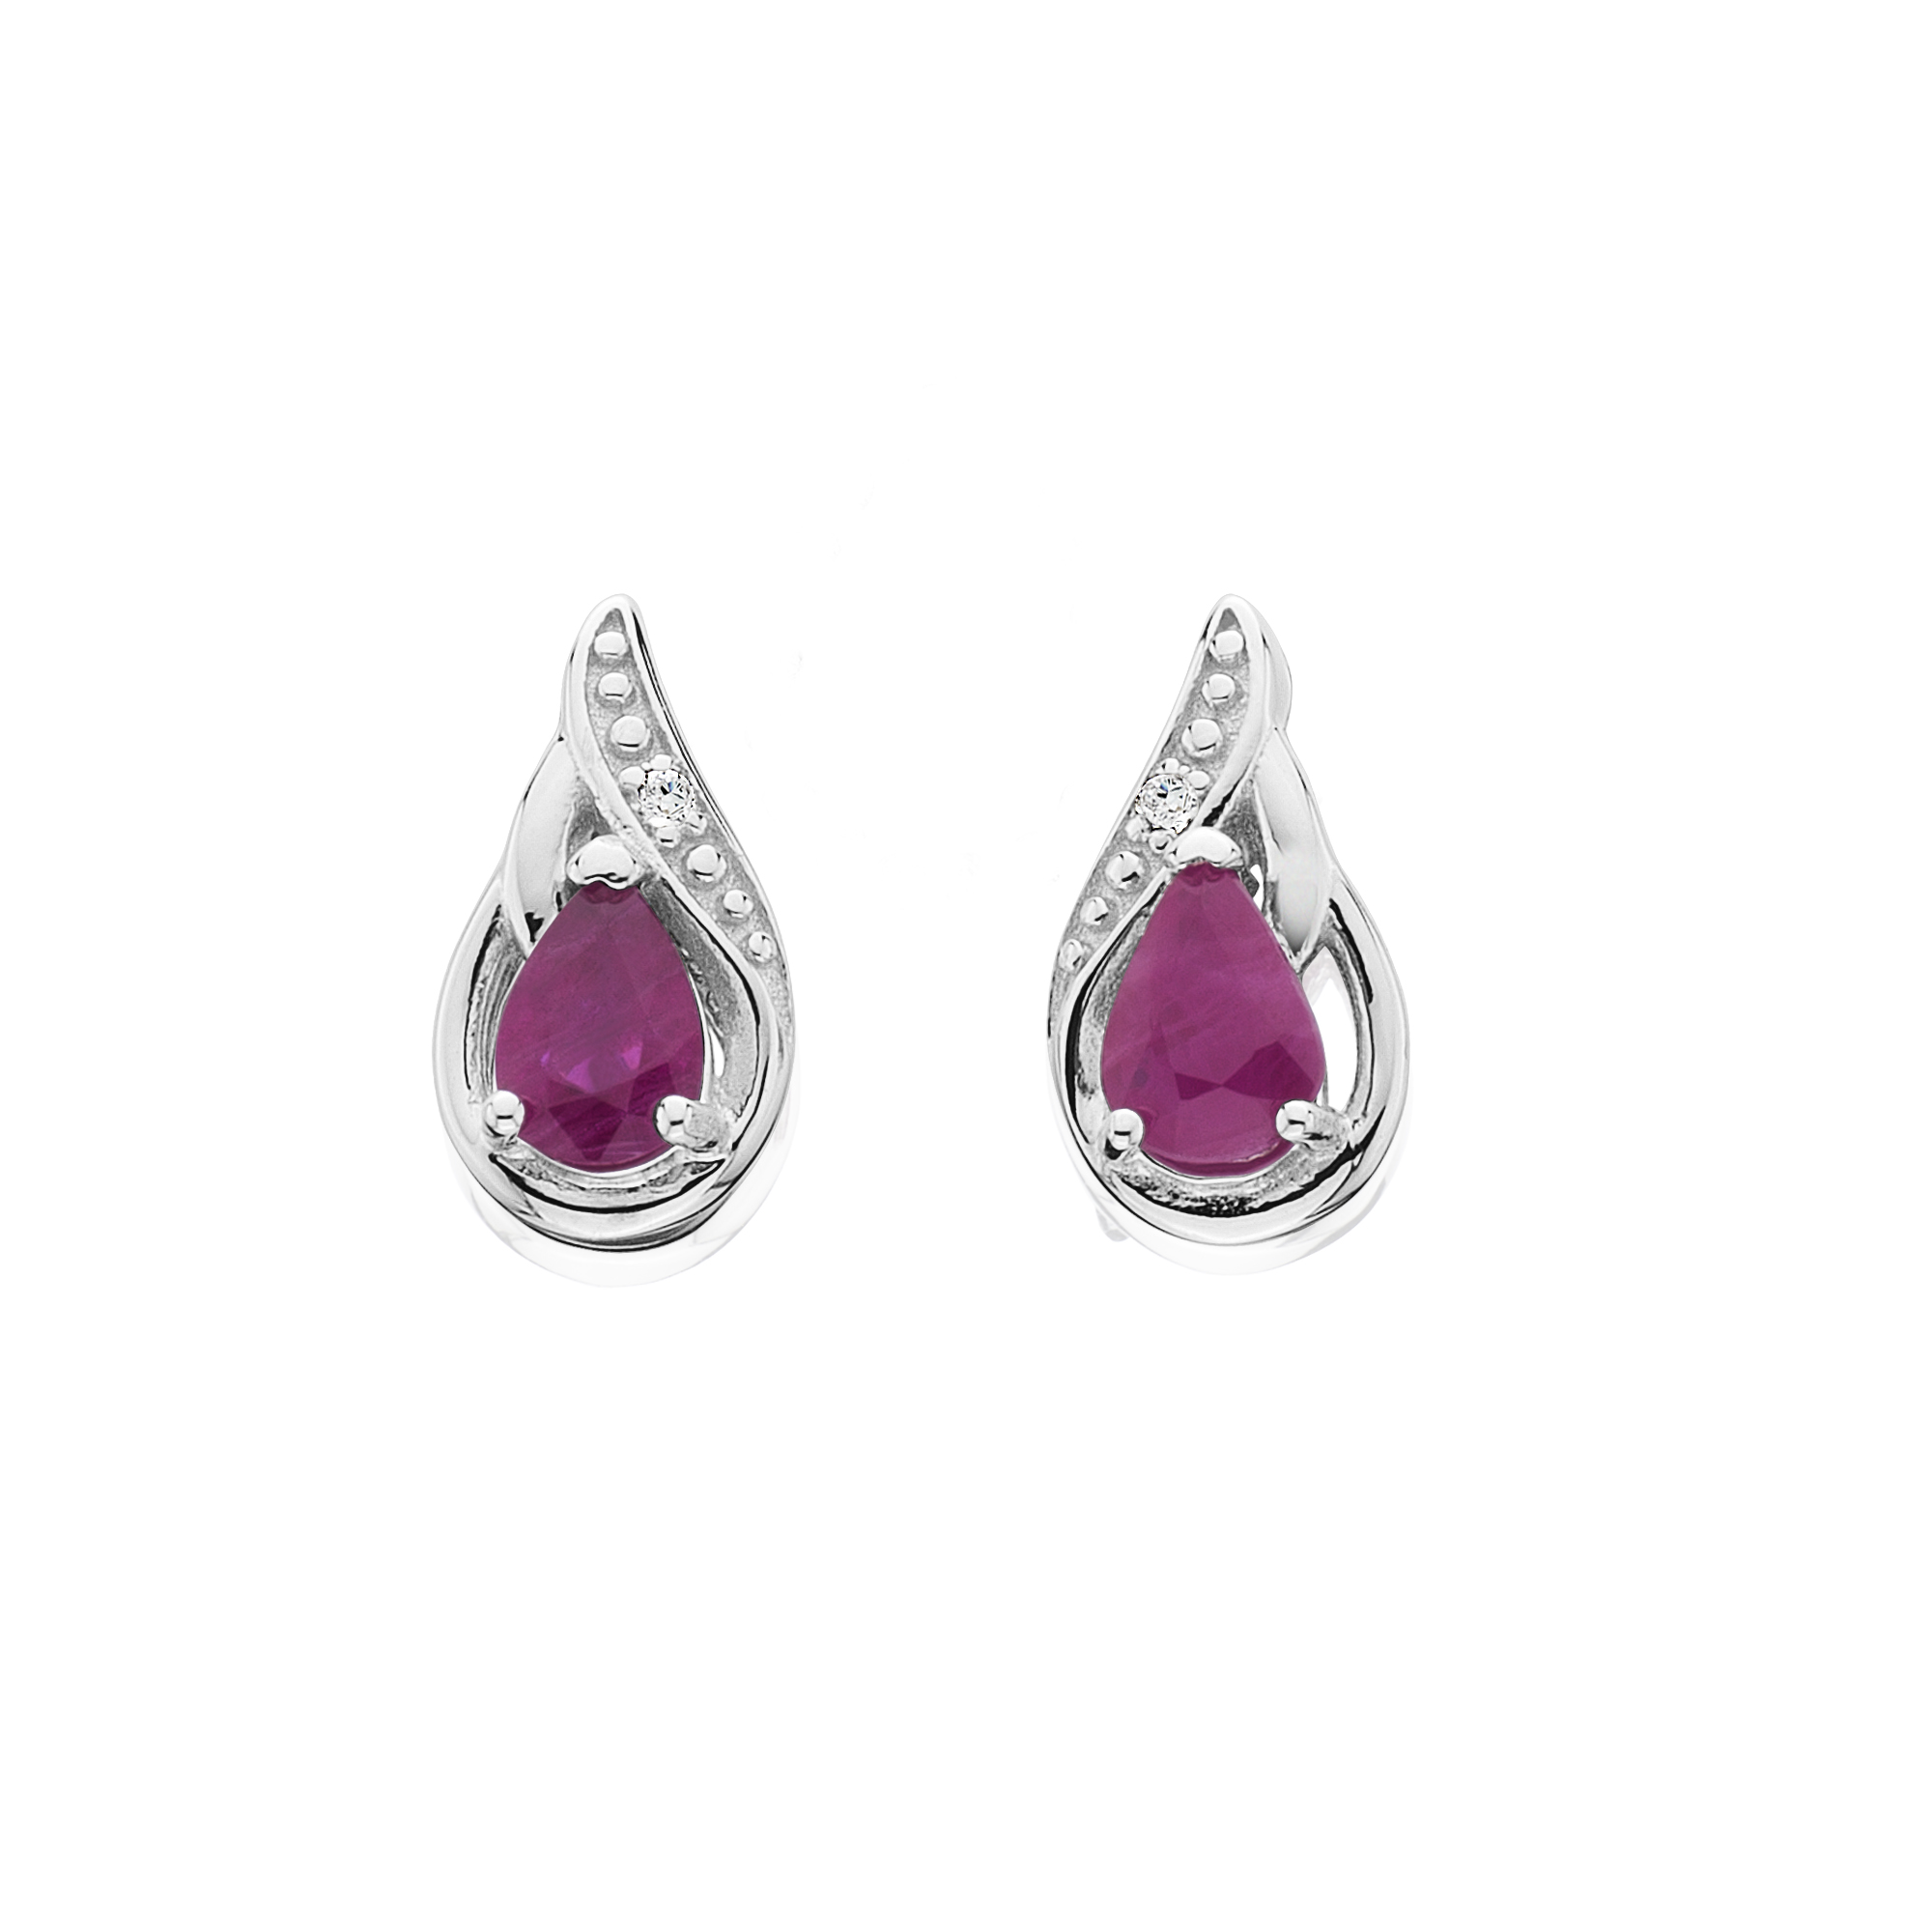 Genuine Ruby and White Sapphire Earrings Sterling Silver